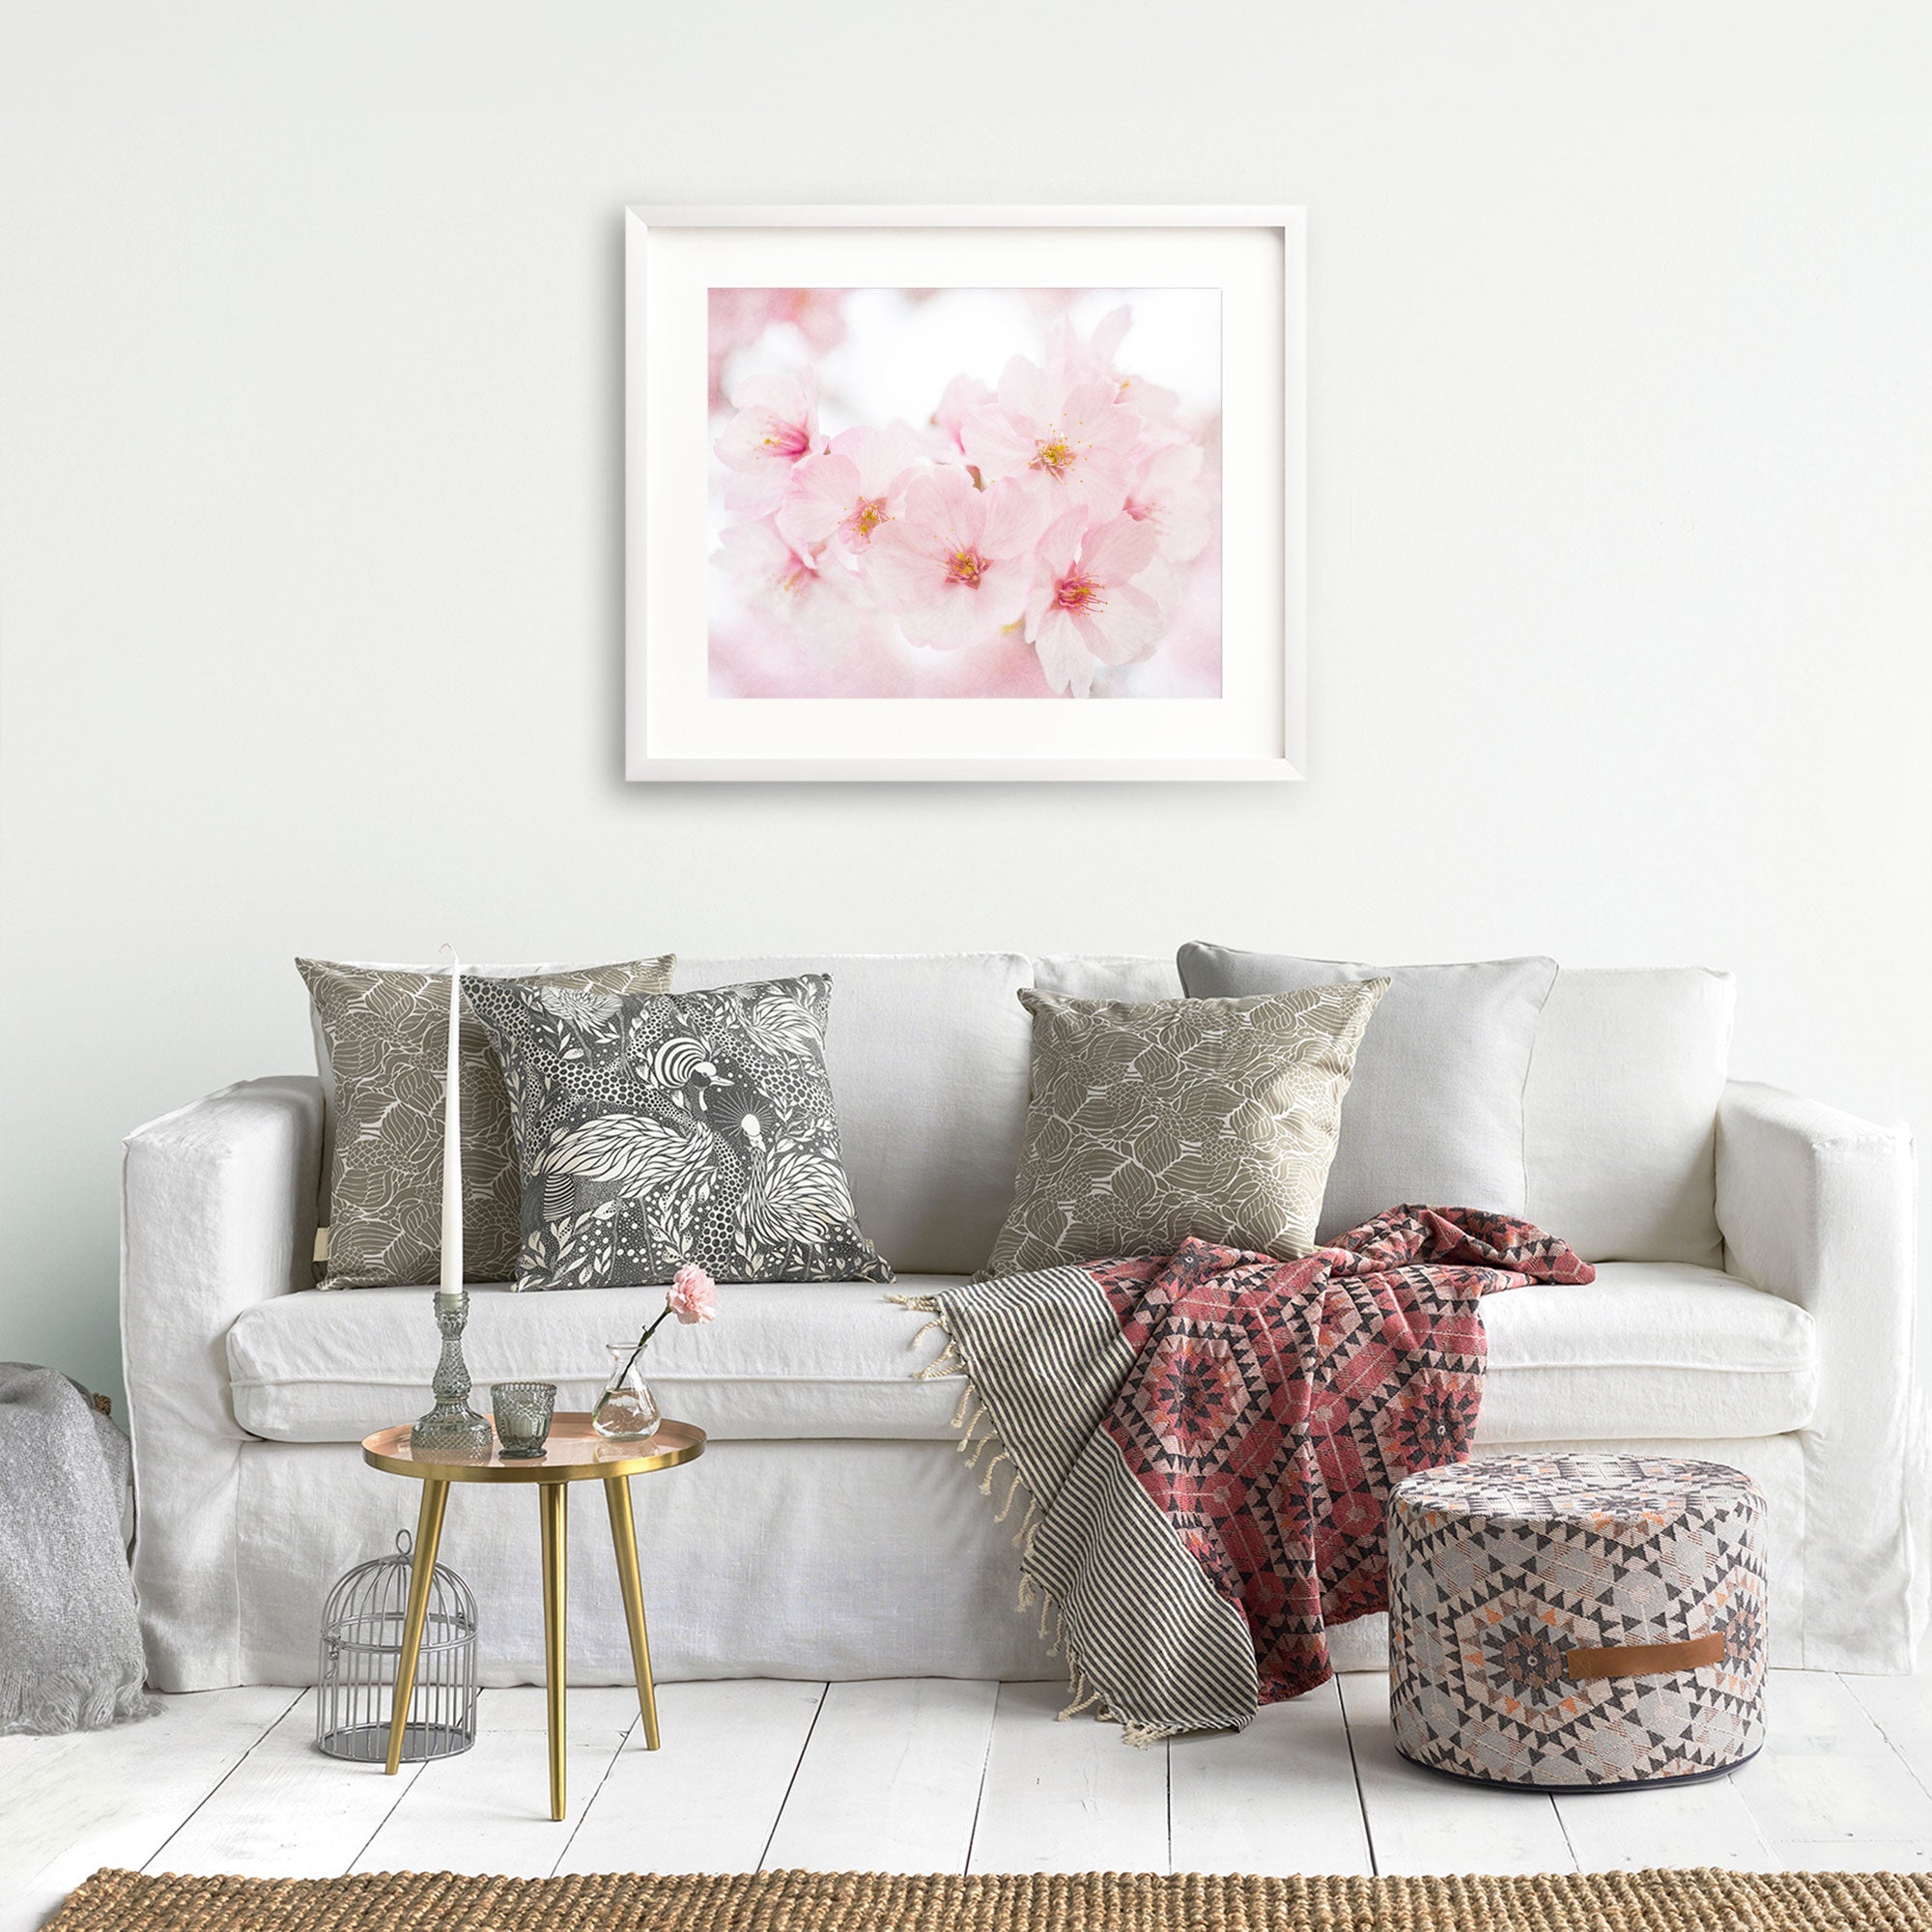 A cozy living room with a white sofa adorned with patterned cushions, a framed Pink Flower Print, 'Cherry Blossom' above it on archival photographic paper, a small round table with books, a birdcage, and a kn